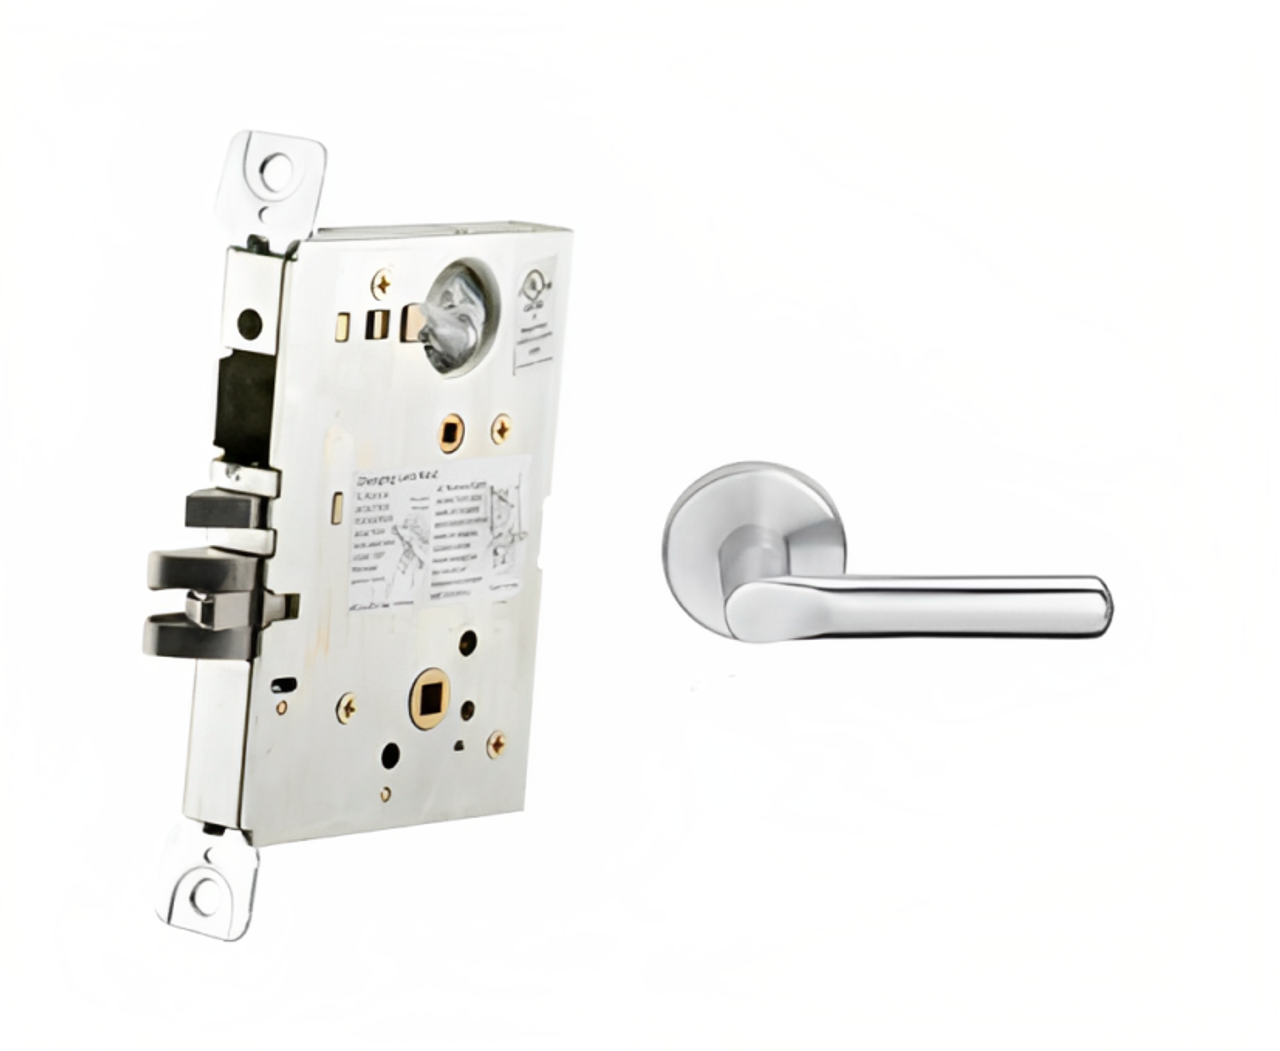 Schlage L9093ELB 18N Electrified Mortise Lock, Fail Safe, w